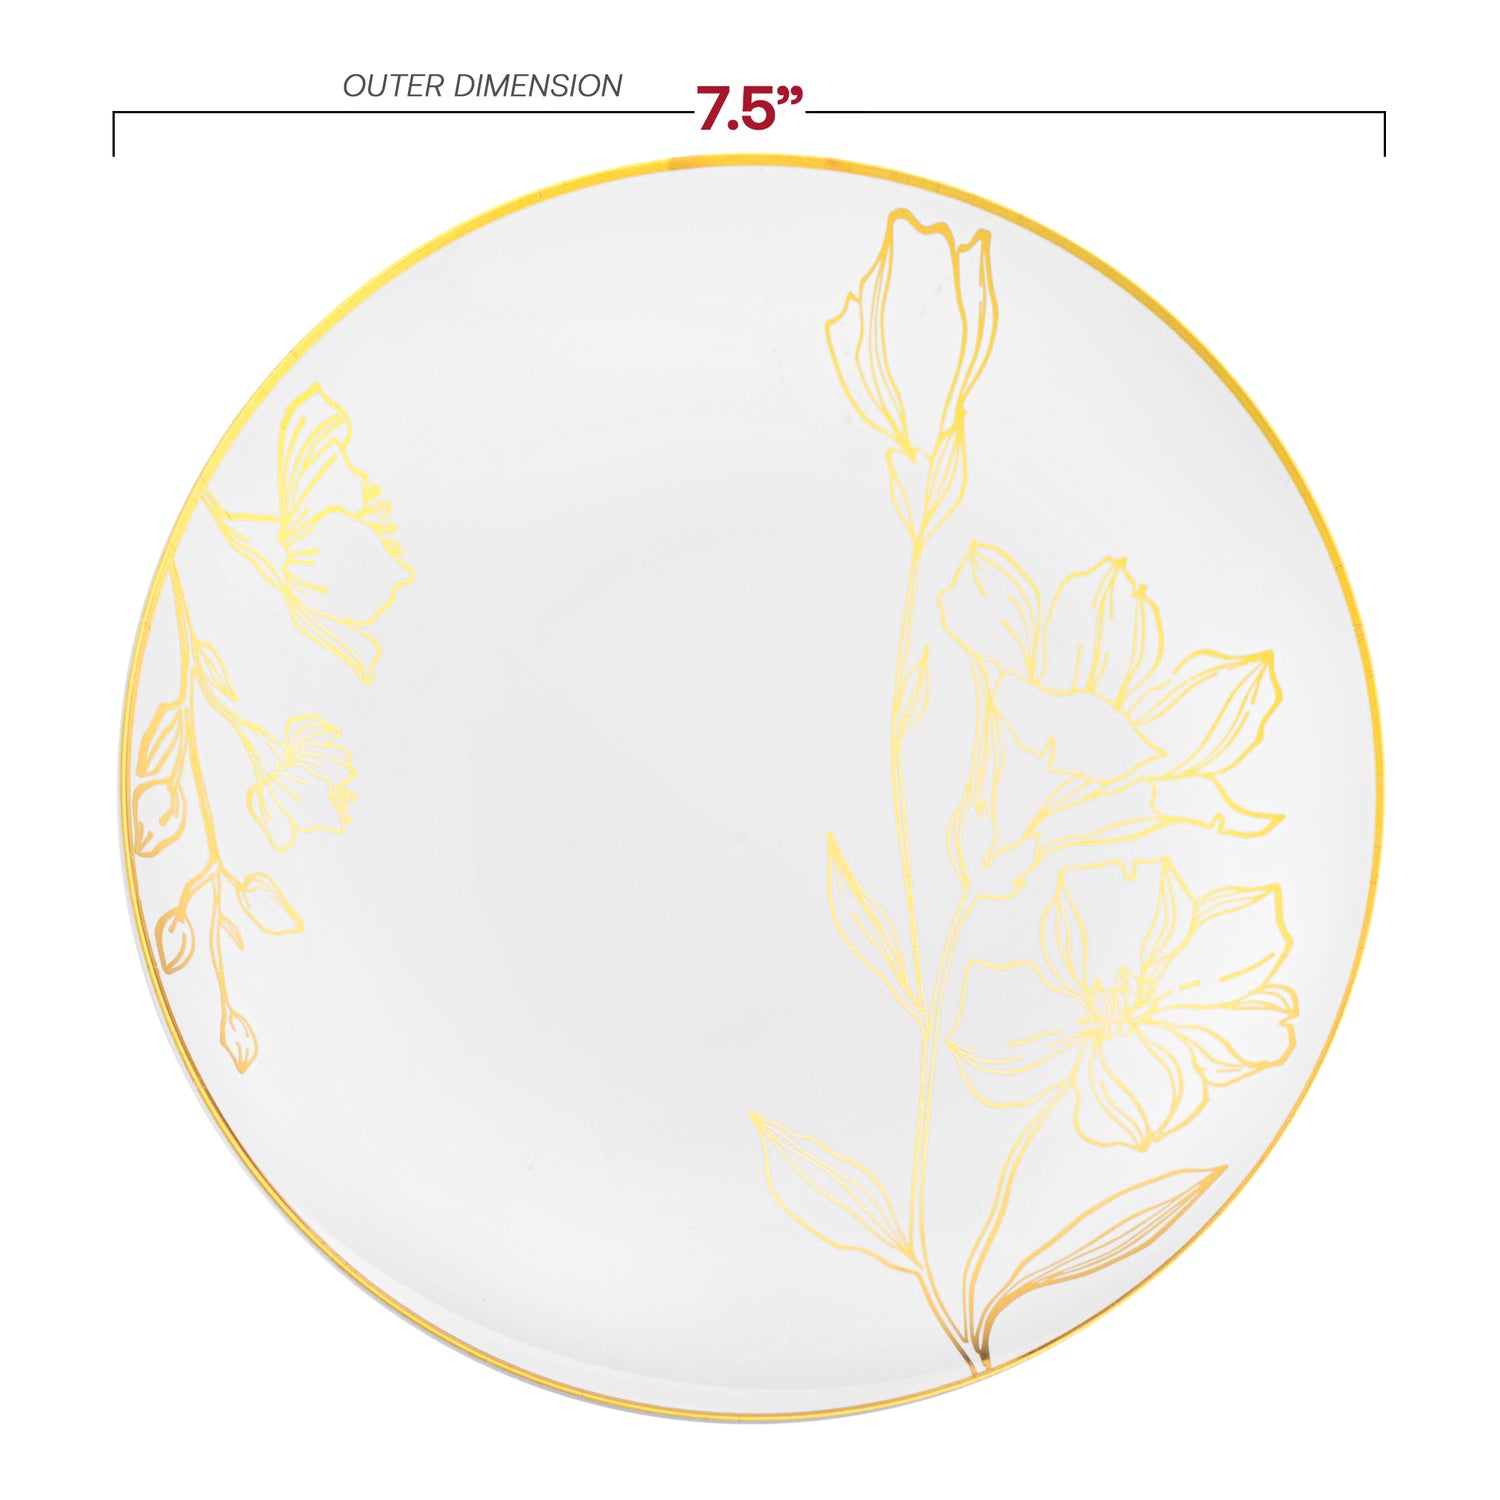 White with Gold Antique Floral Round Disposable Plastic Appetizer/Salad Plates (7.5") Dimension | The Kaya Collection